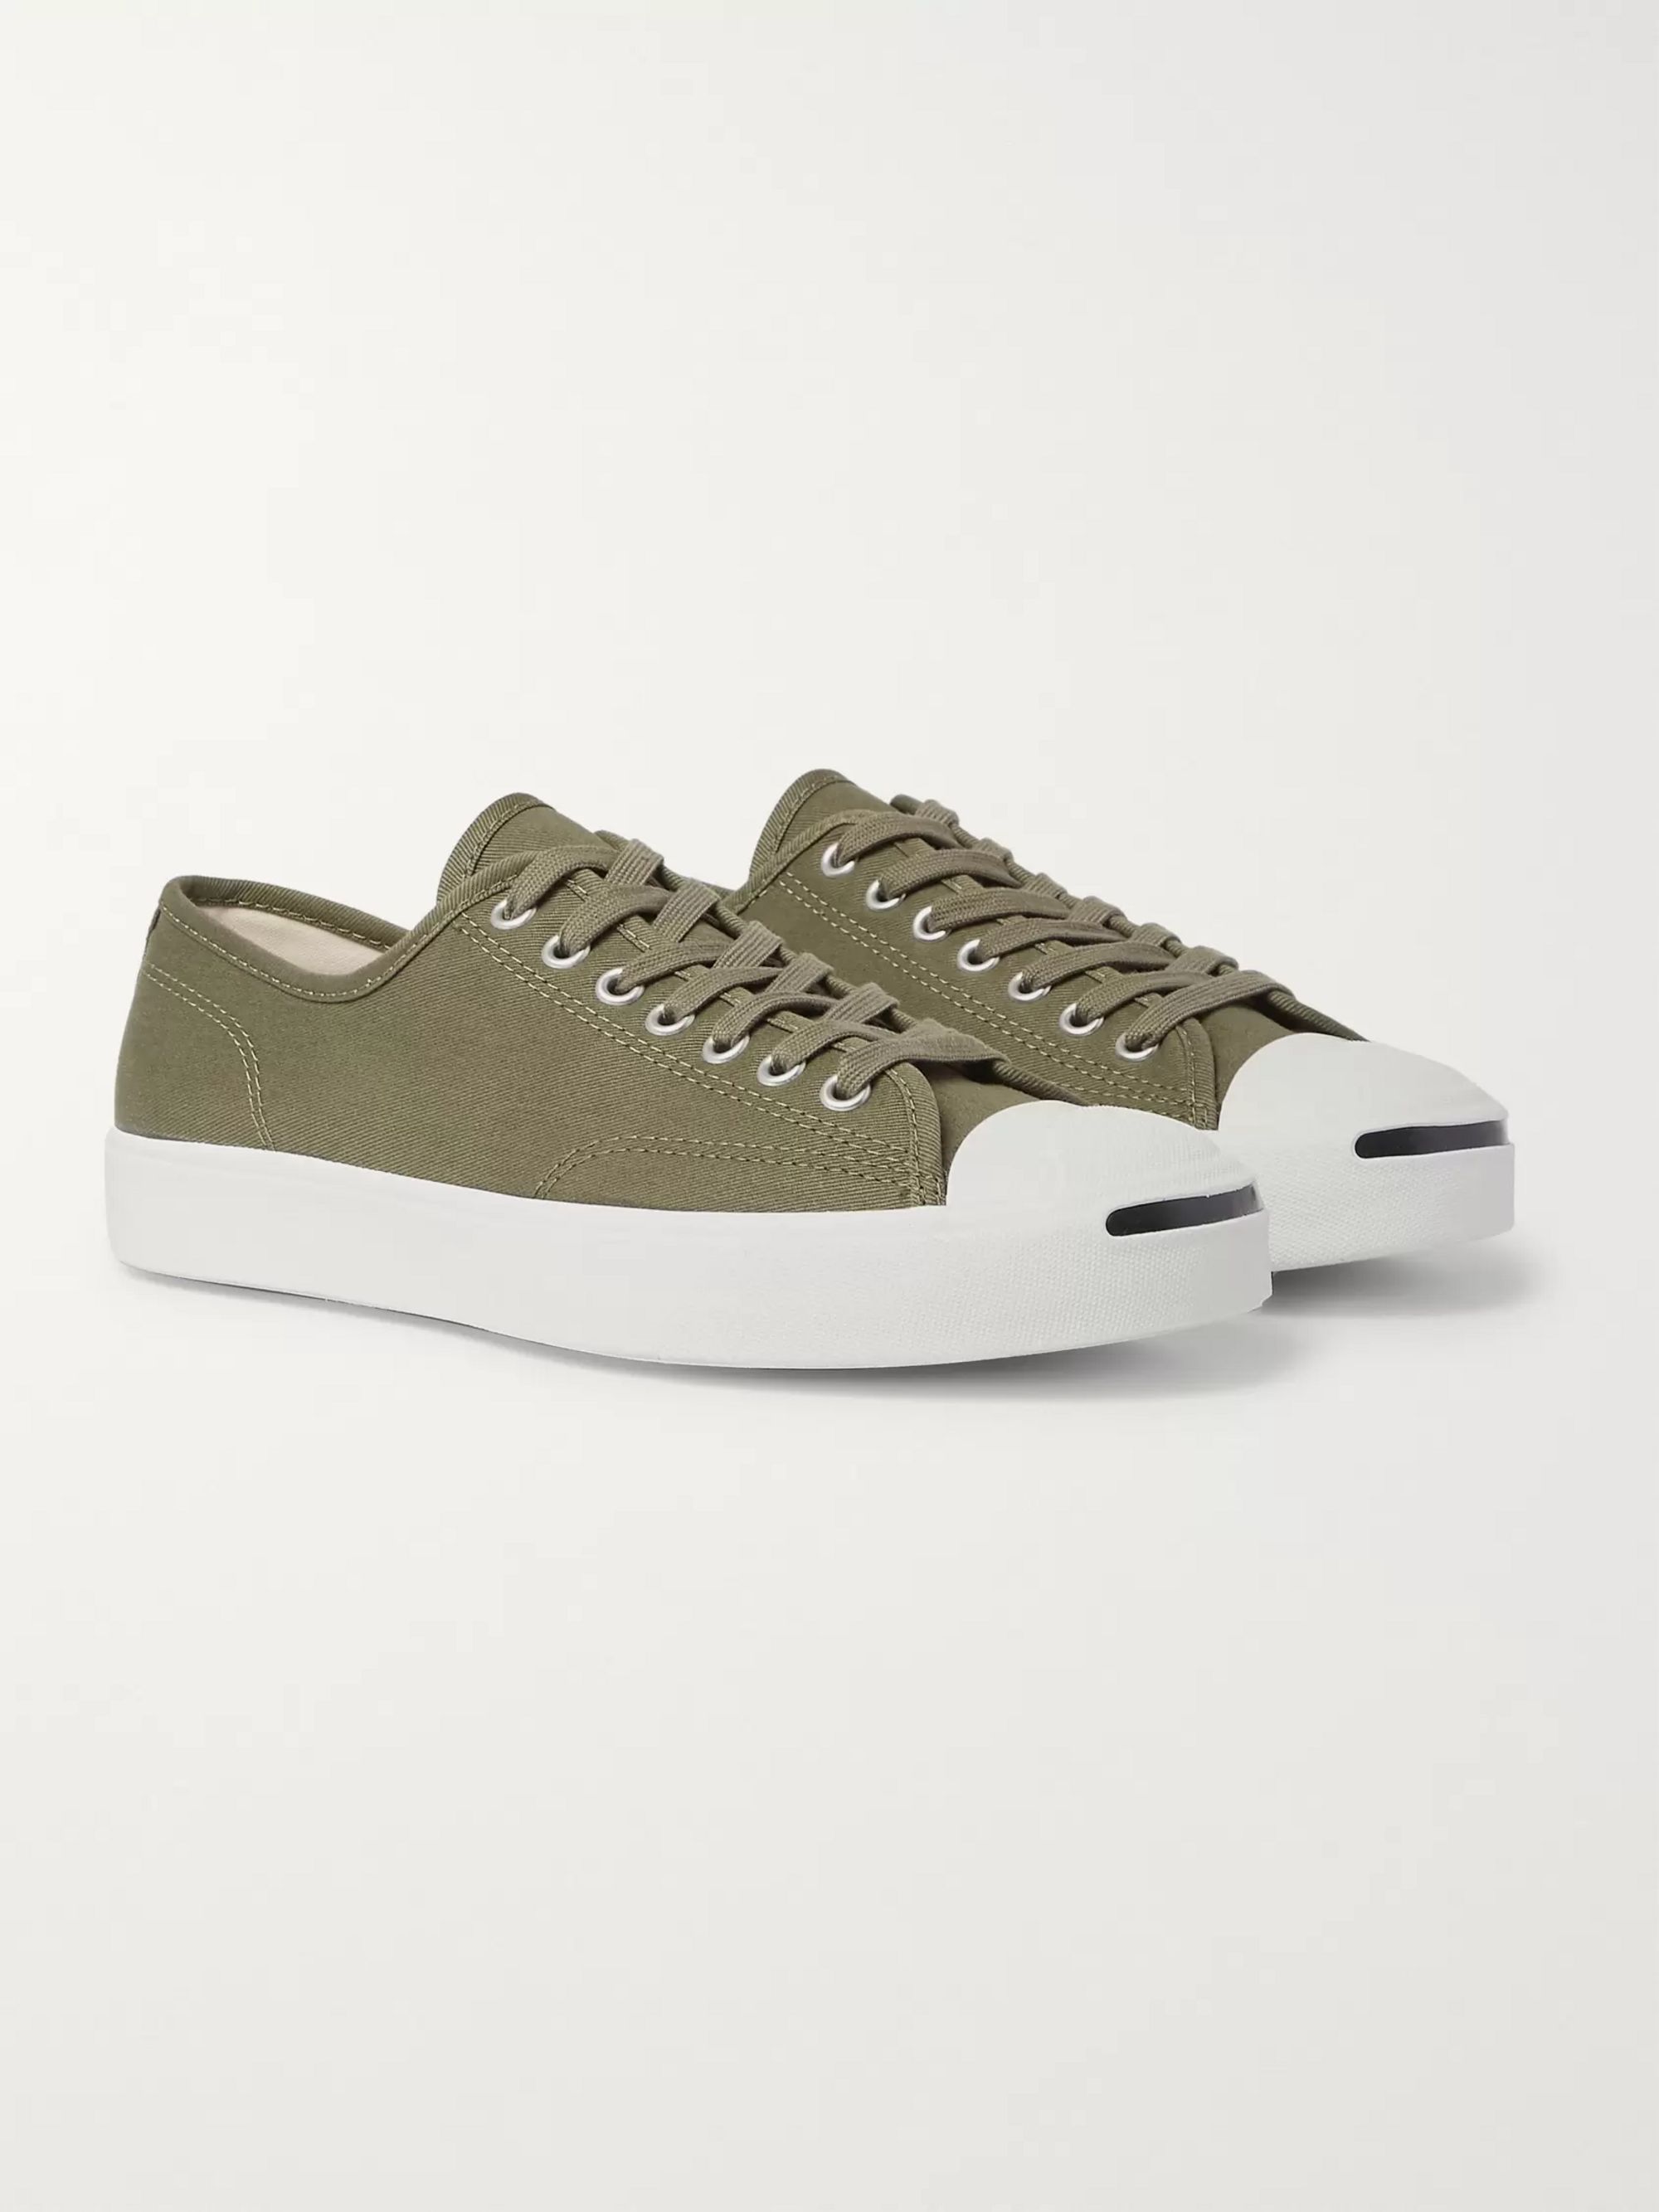 converse jack purcell no laces